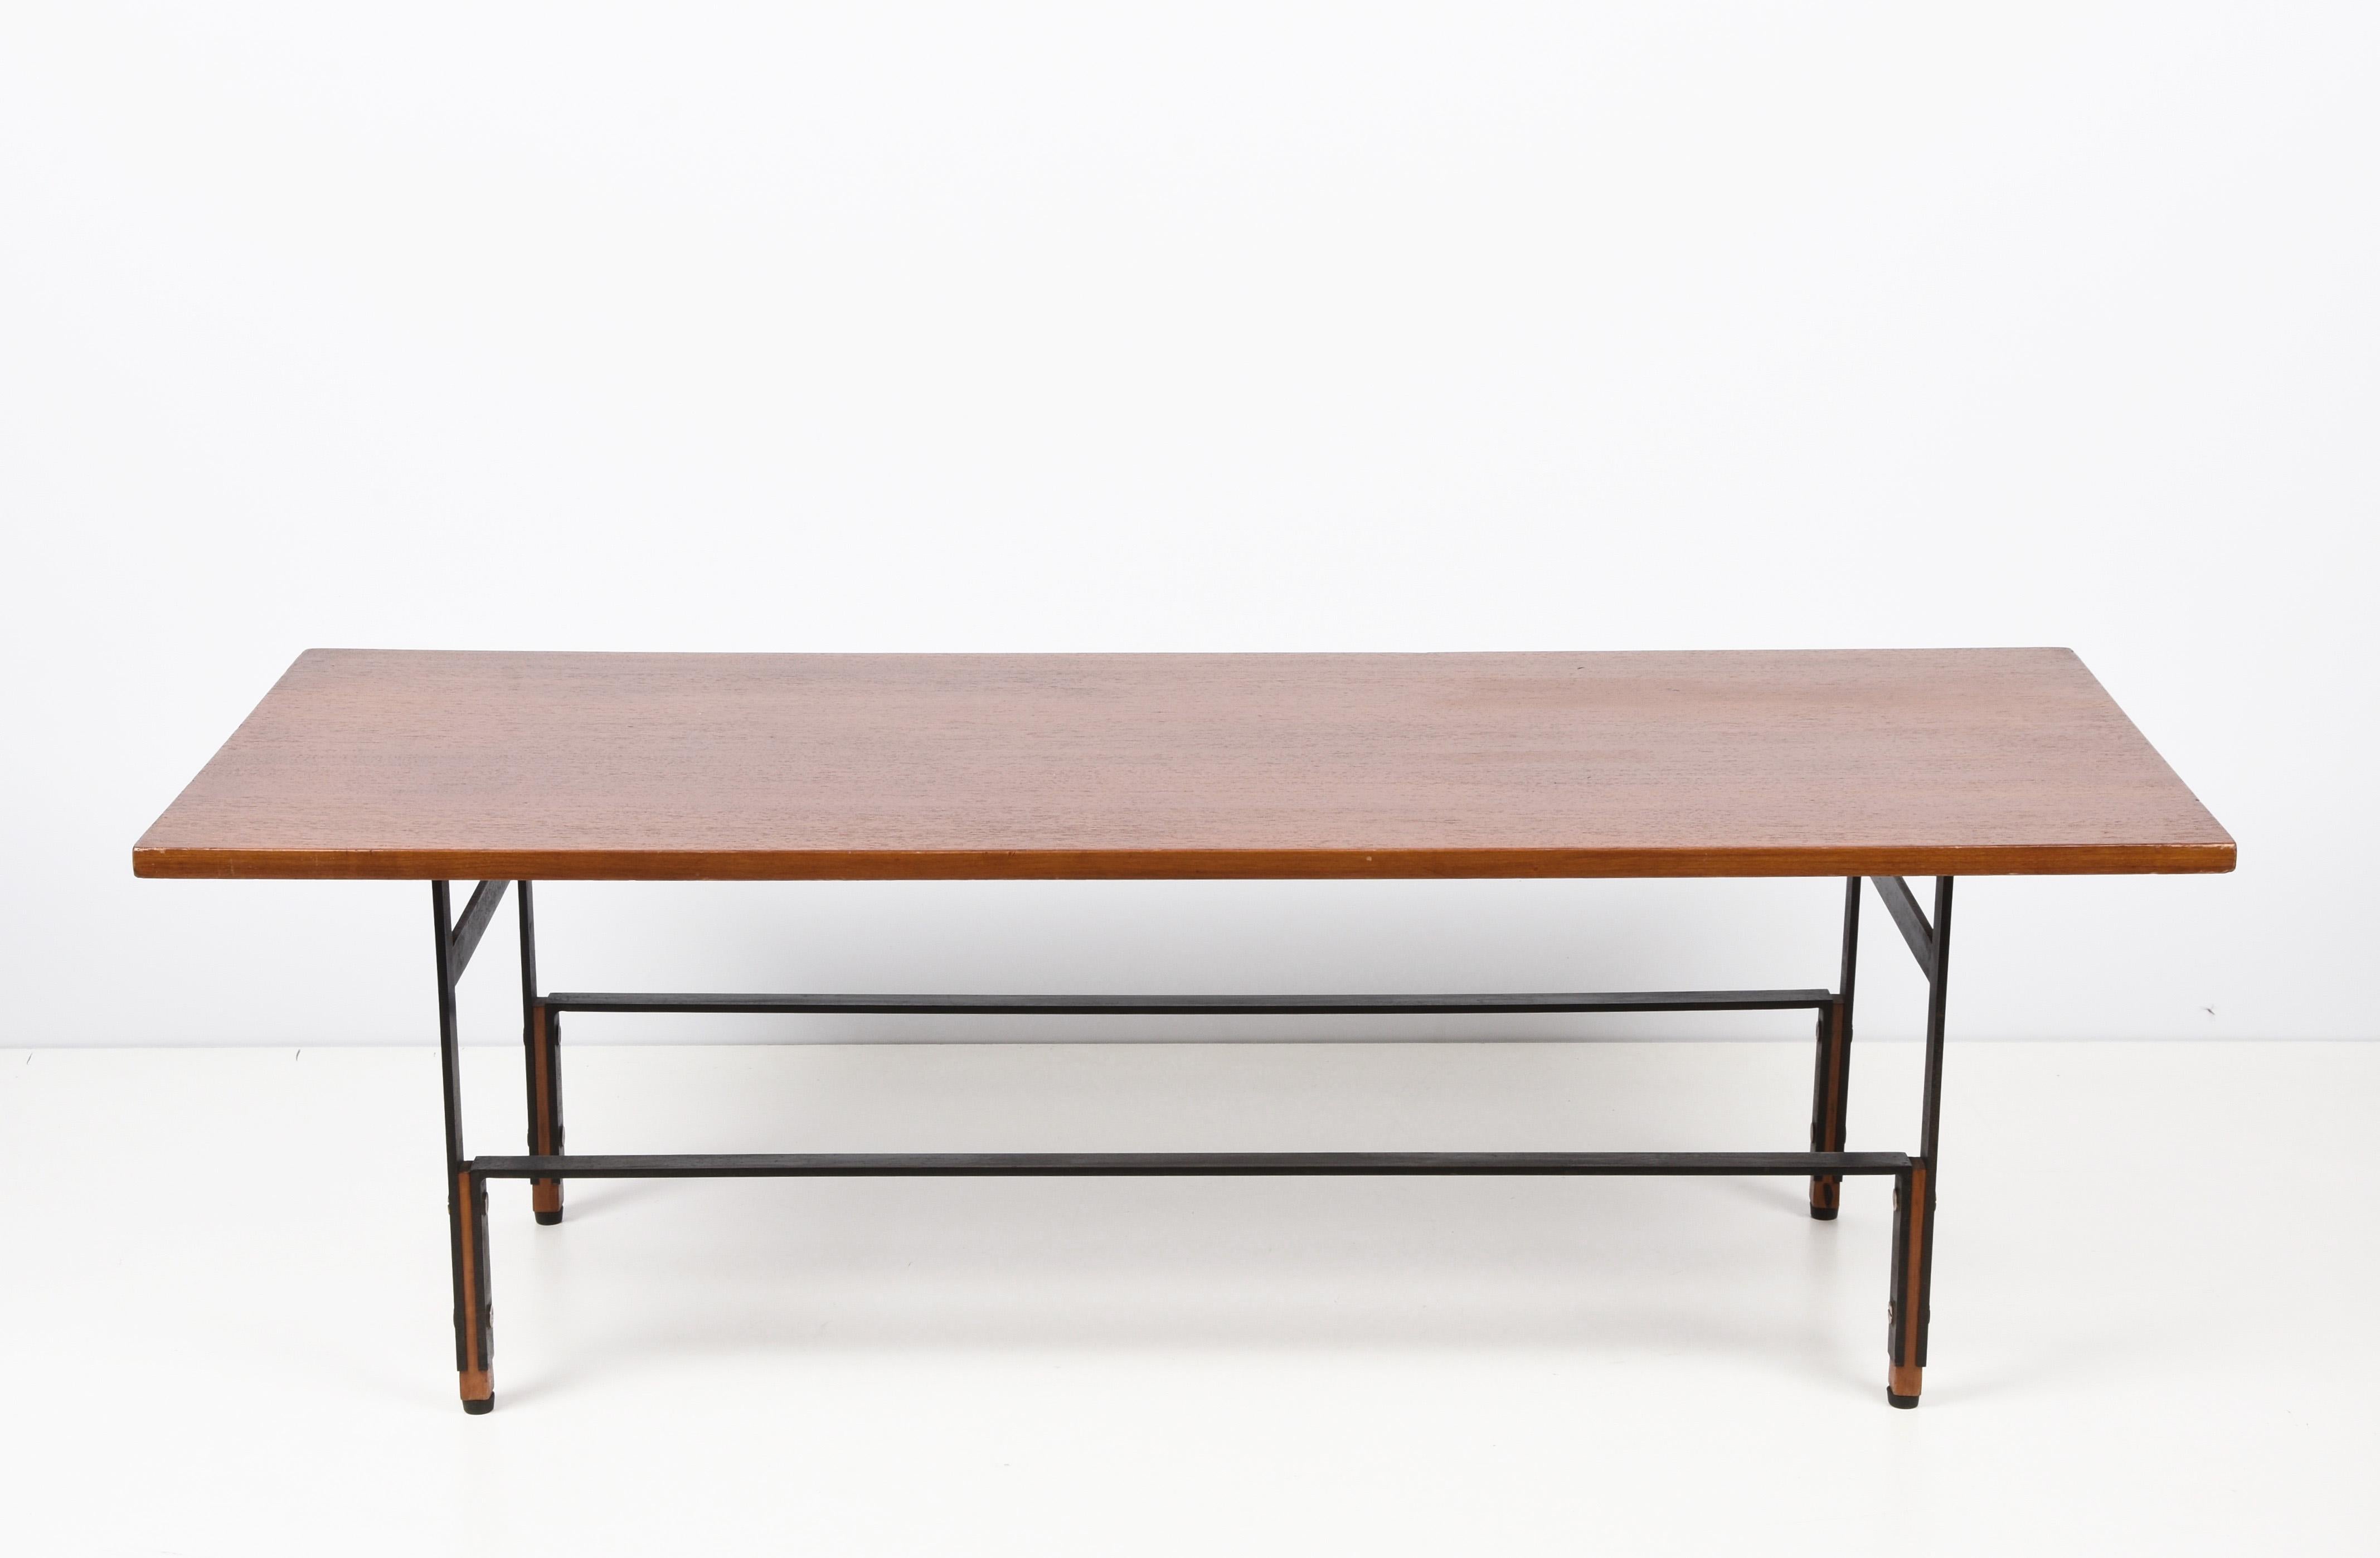 Spectacular coffee table in teak, black enameled iron and brass. This wonderful object was produced in Italy in the 1960s.

Everything in this article is classy: the materials, with a brown teak top and a black enameled metal structure; the lines,